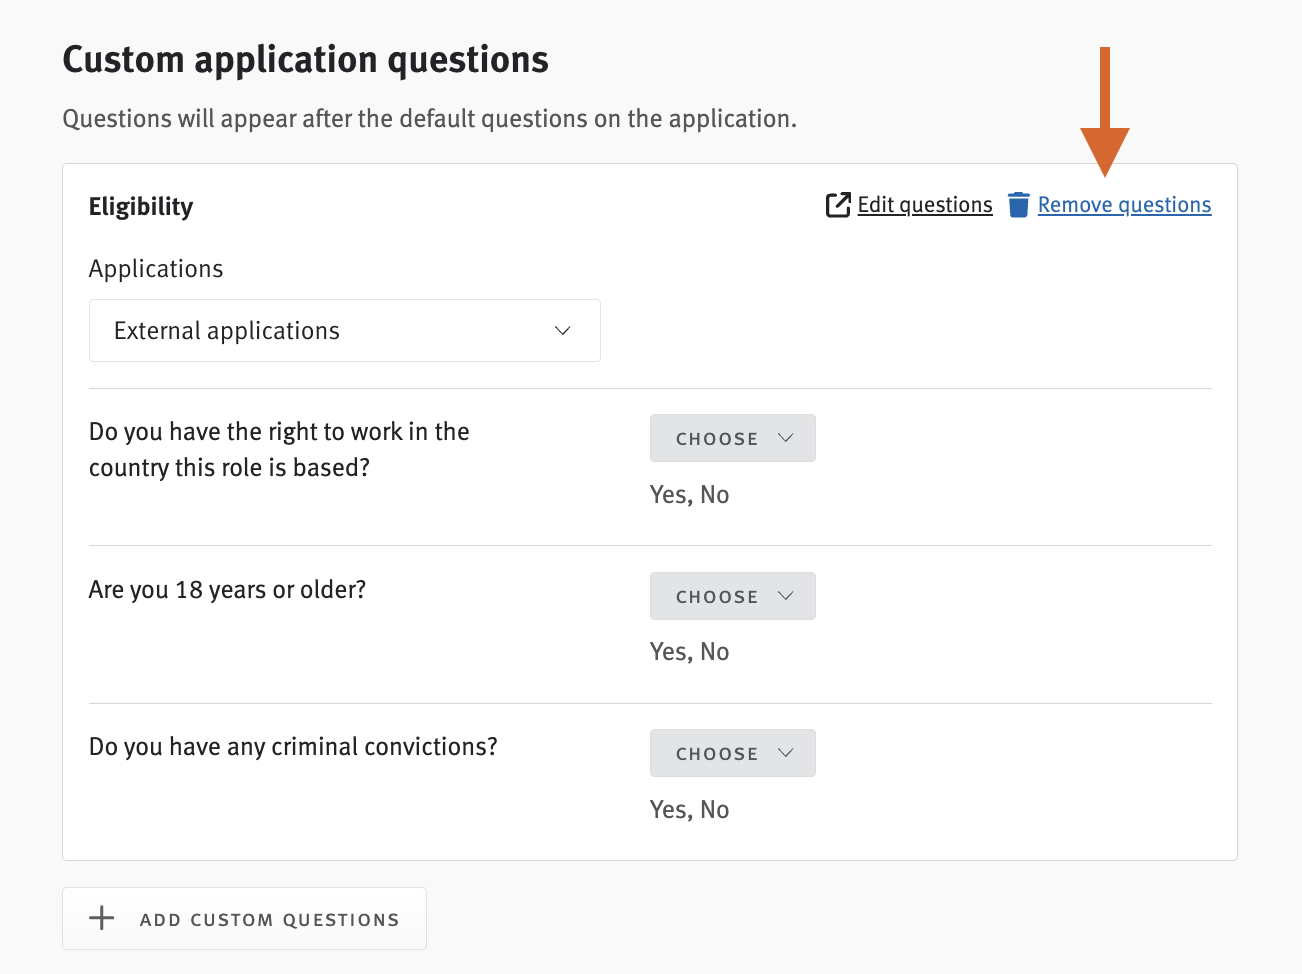 Custom application questions section with arrow pointing to Remove questions button.